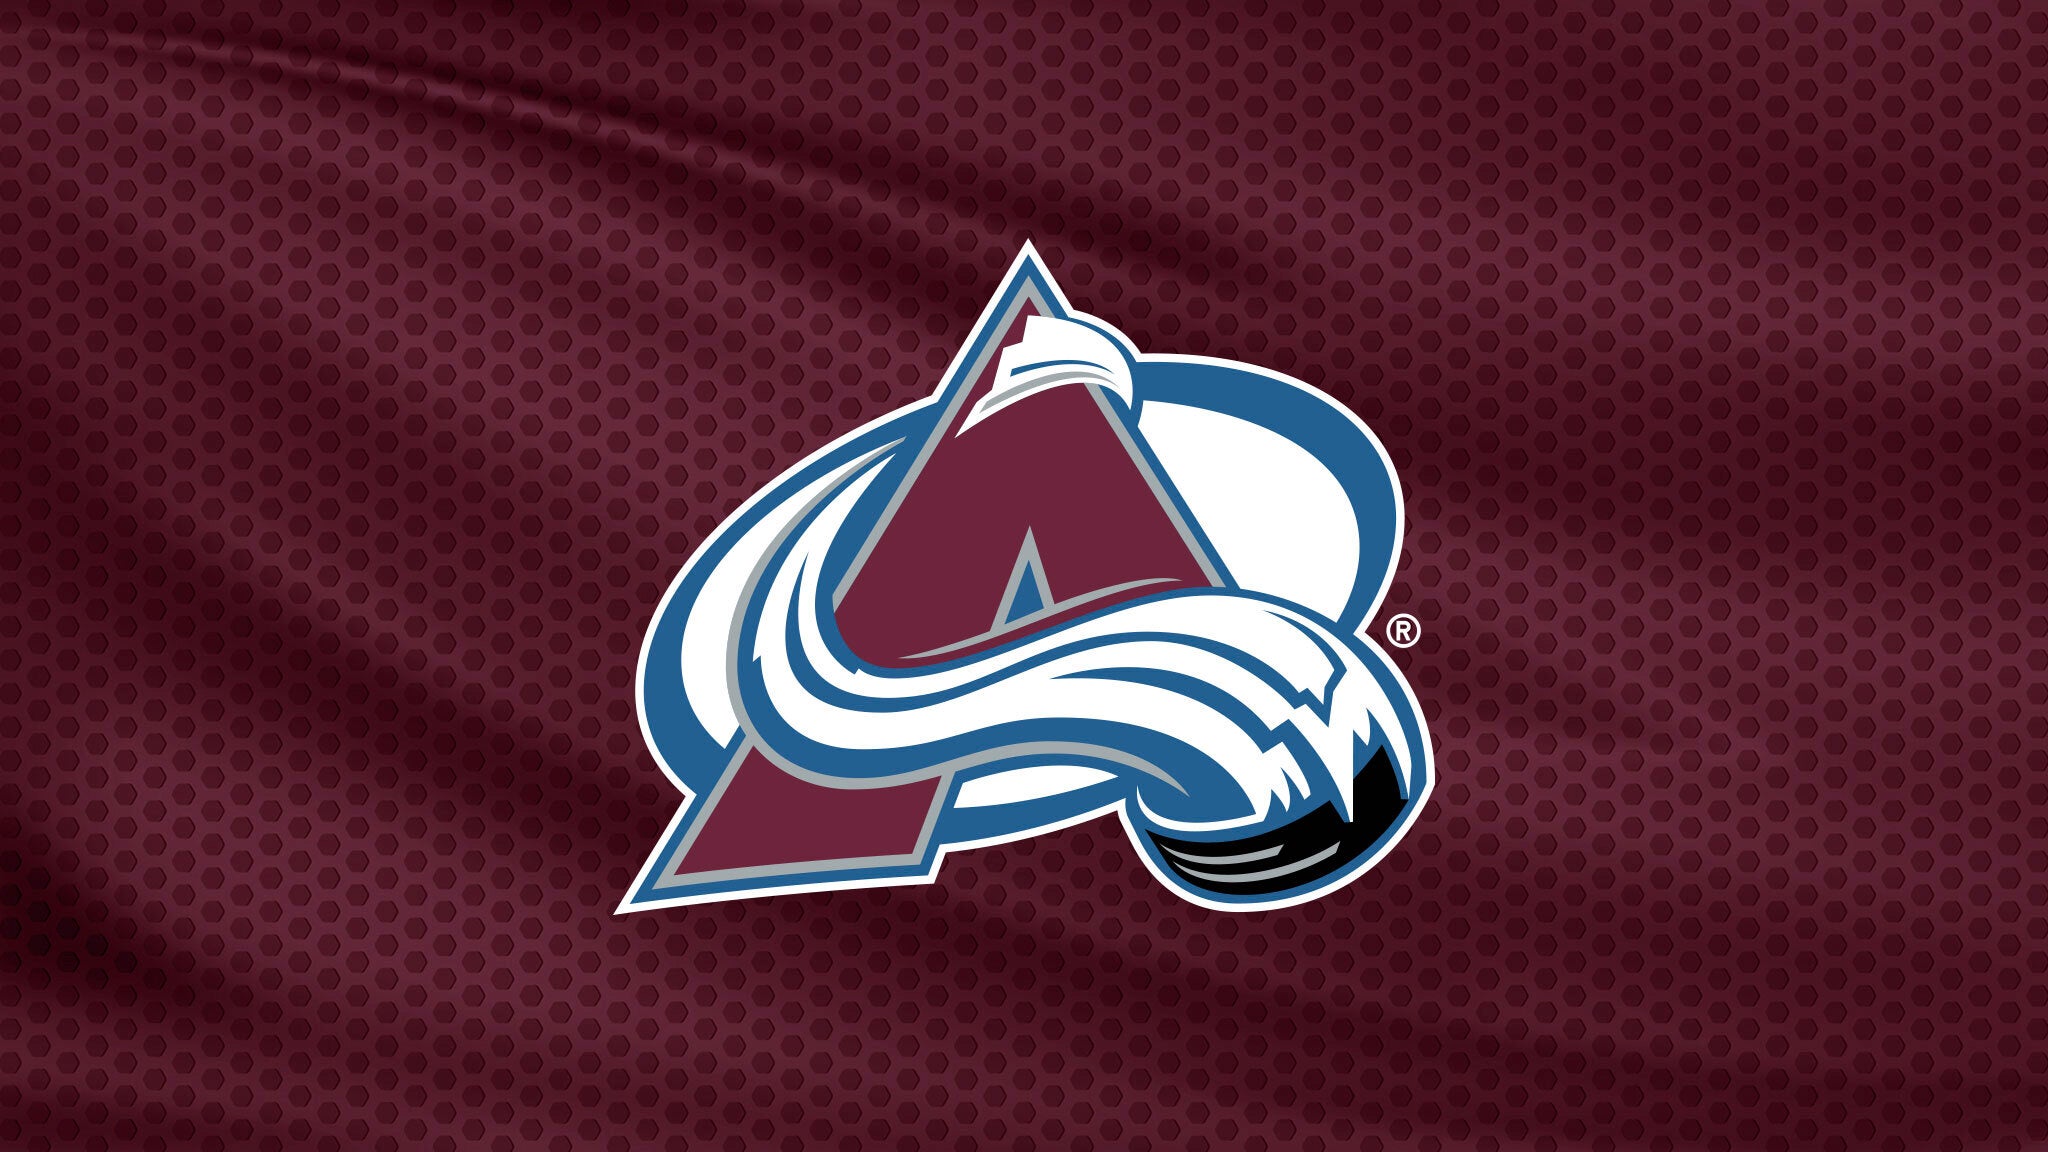 Colorado Avalanche vs. Detroit Red Wings at Ball Arena